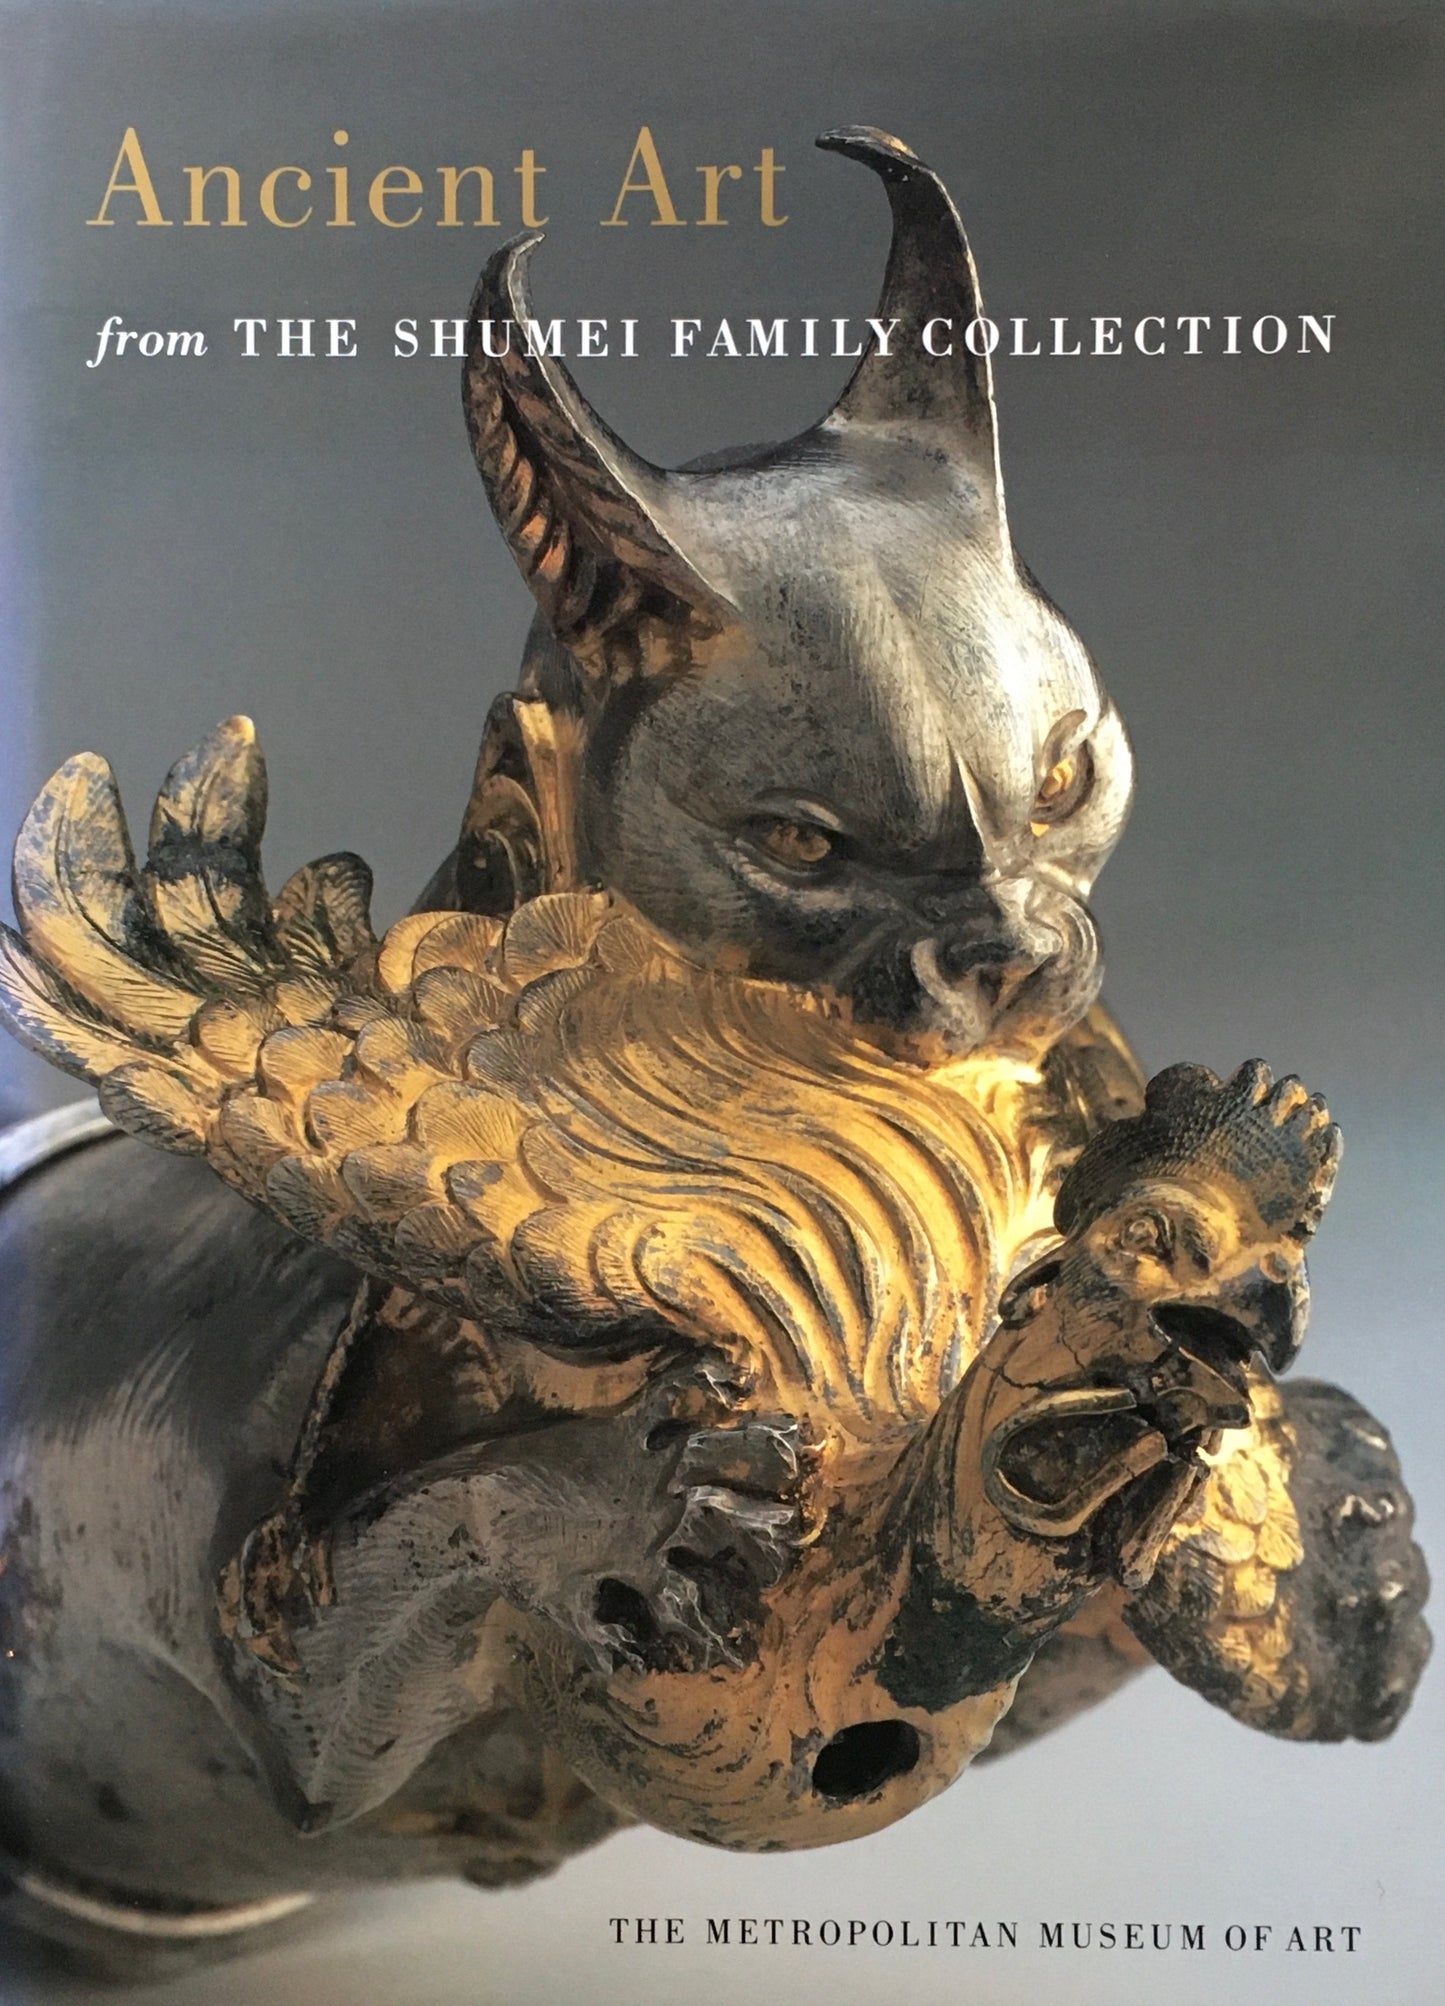 ANCIENT ART FROM THE SHUMEI FAMILY COLLECTION